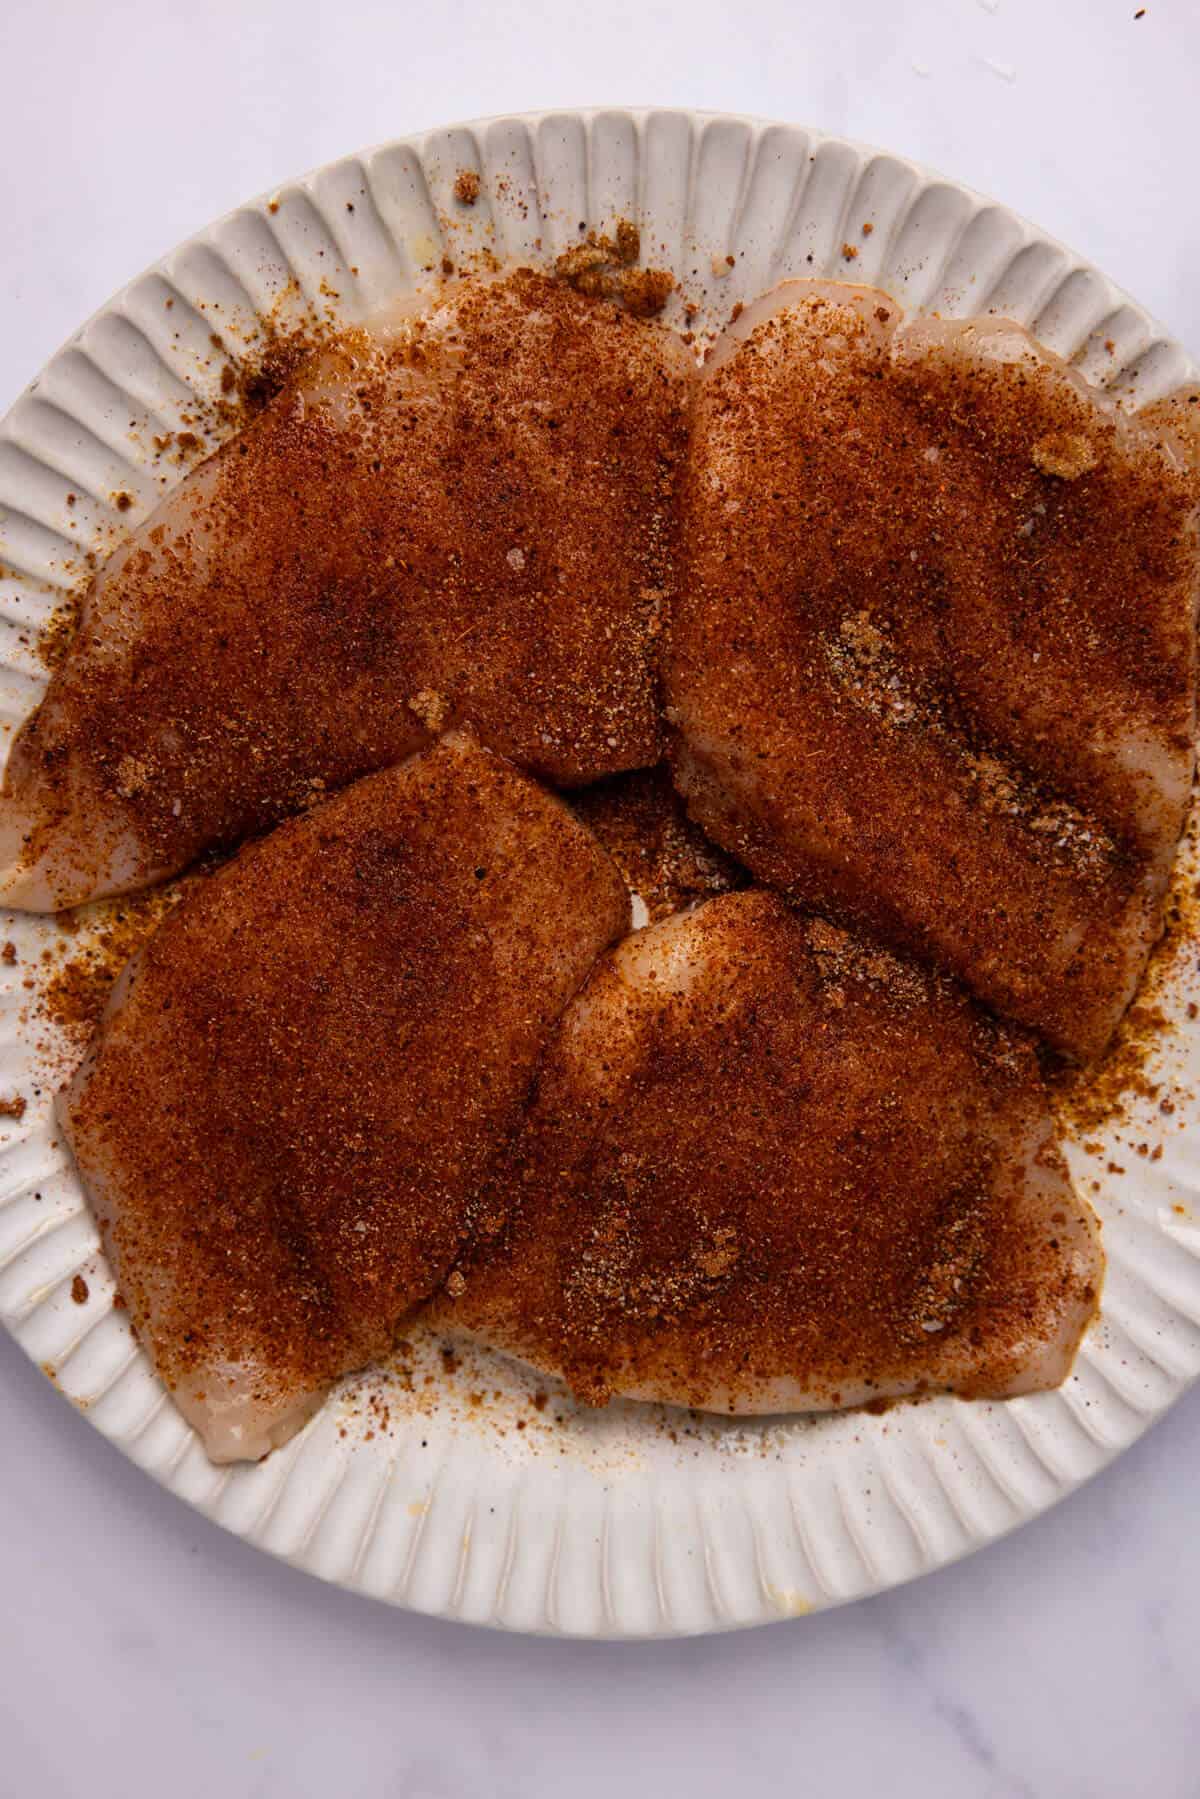 Raw chicken breasts coated with blackened seasoning.